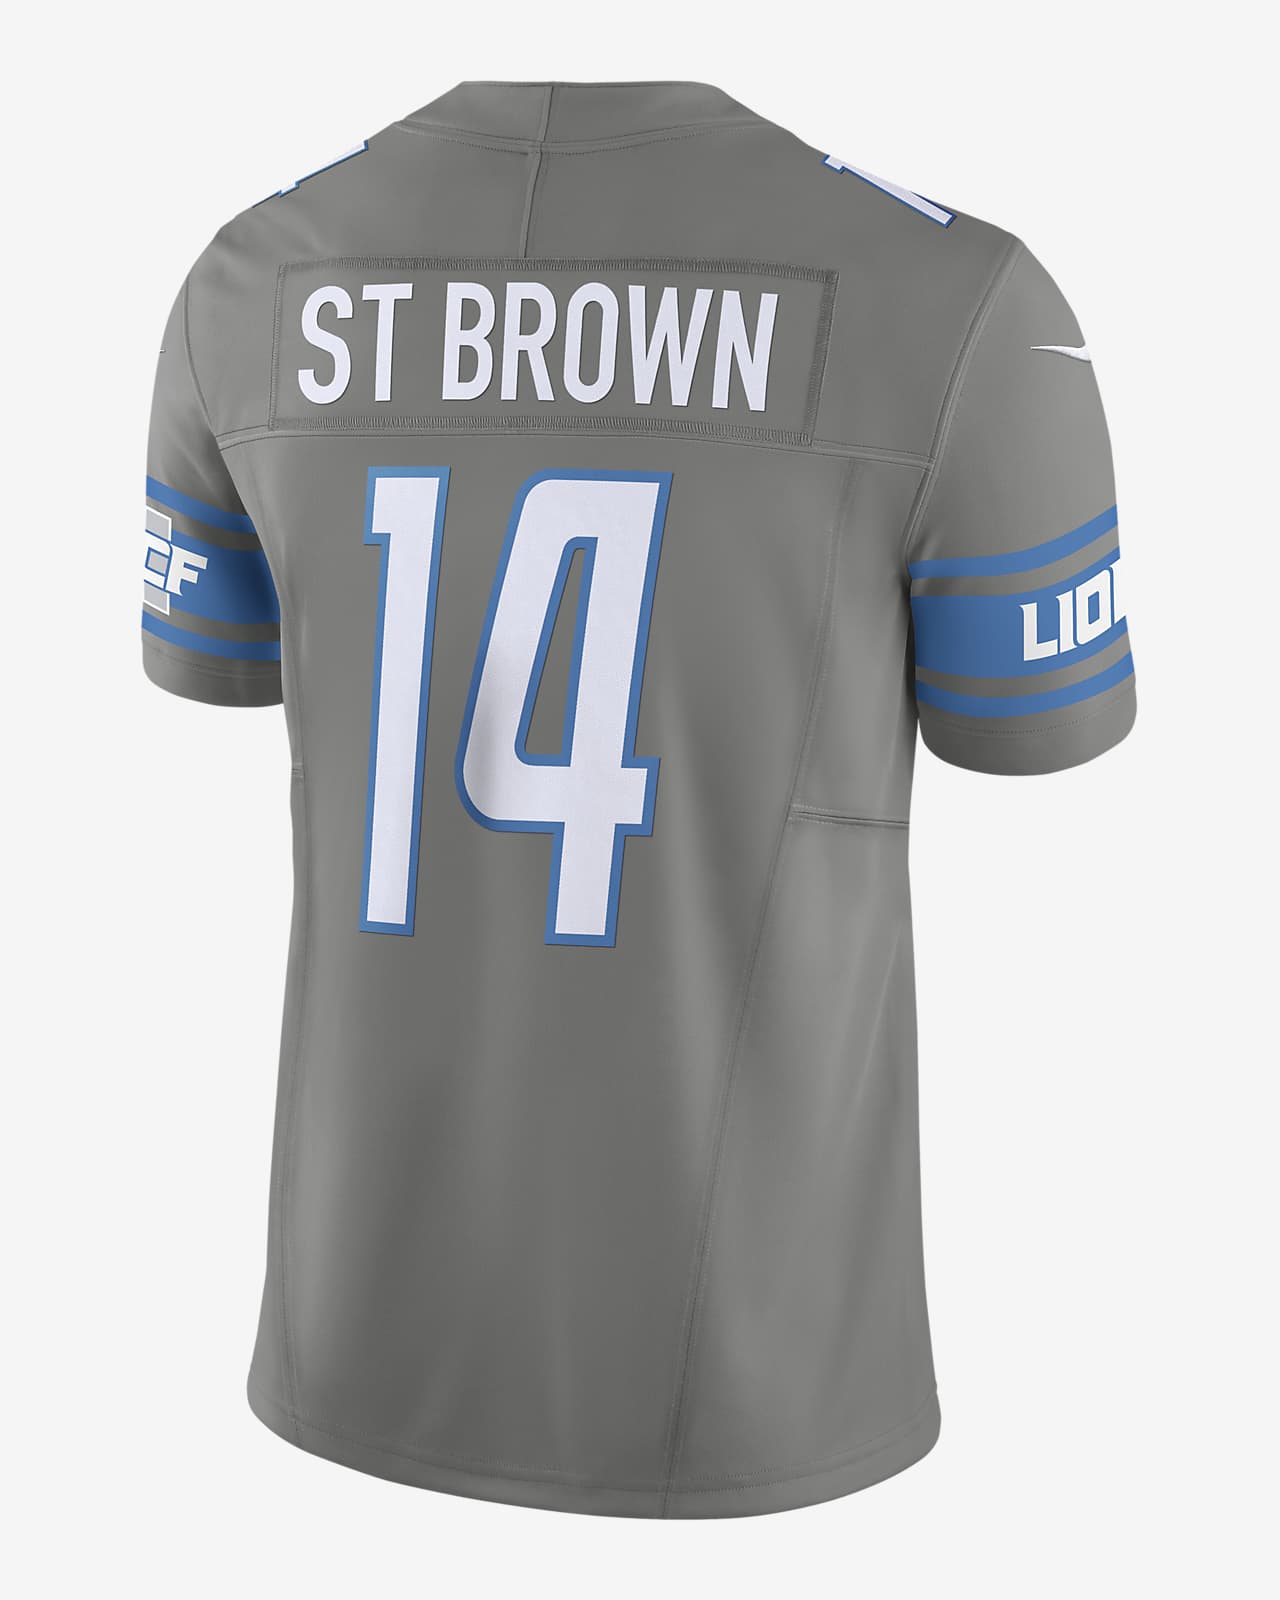 NIKE NFL JERSEY SIZING, WHAT SHOULD I GET???